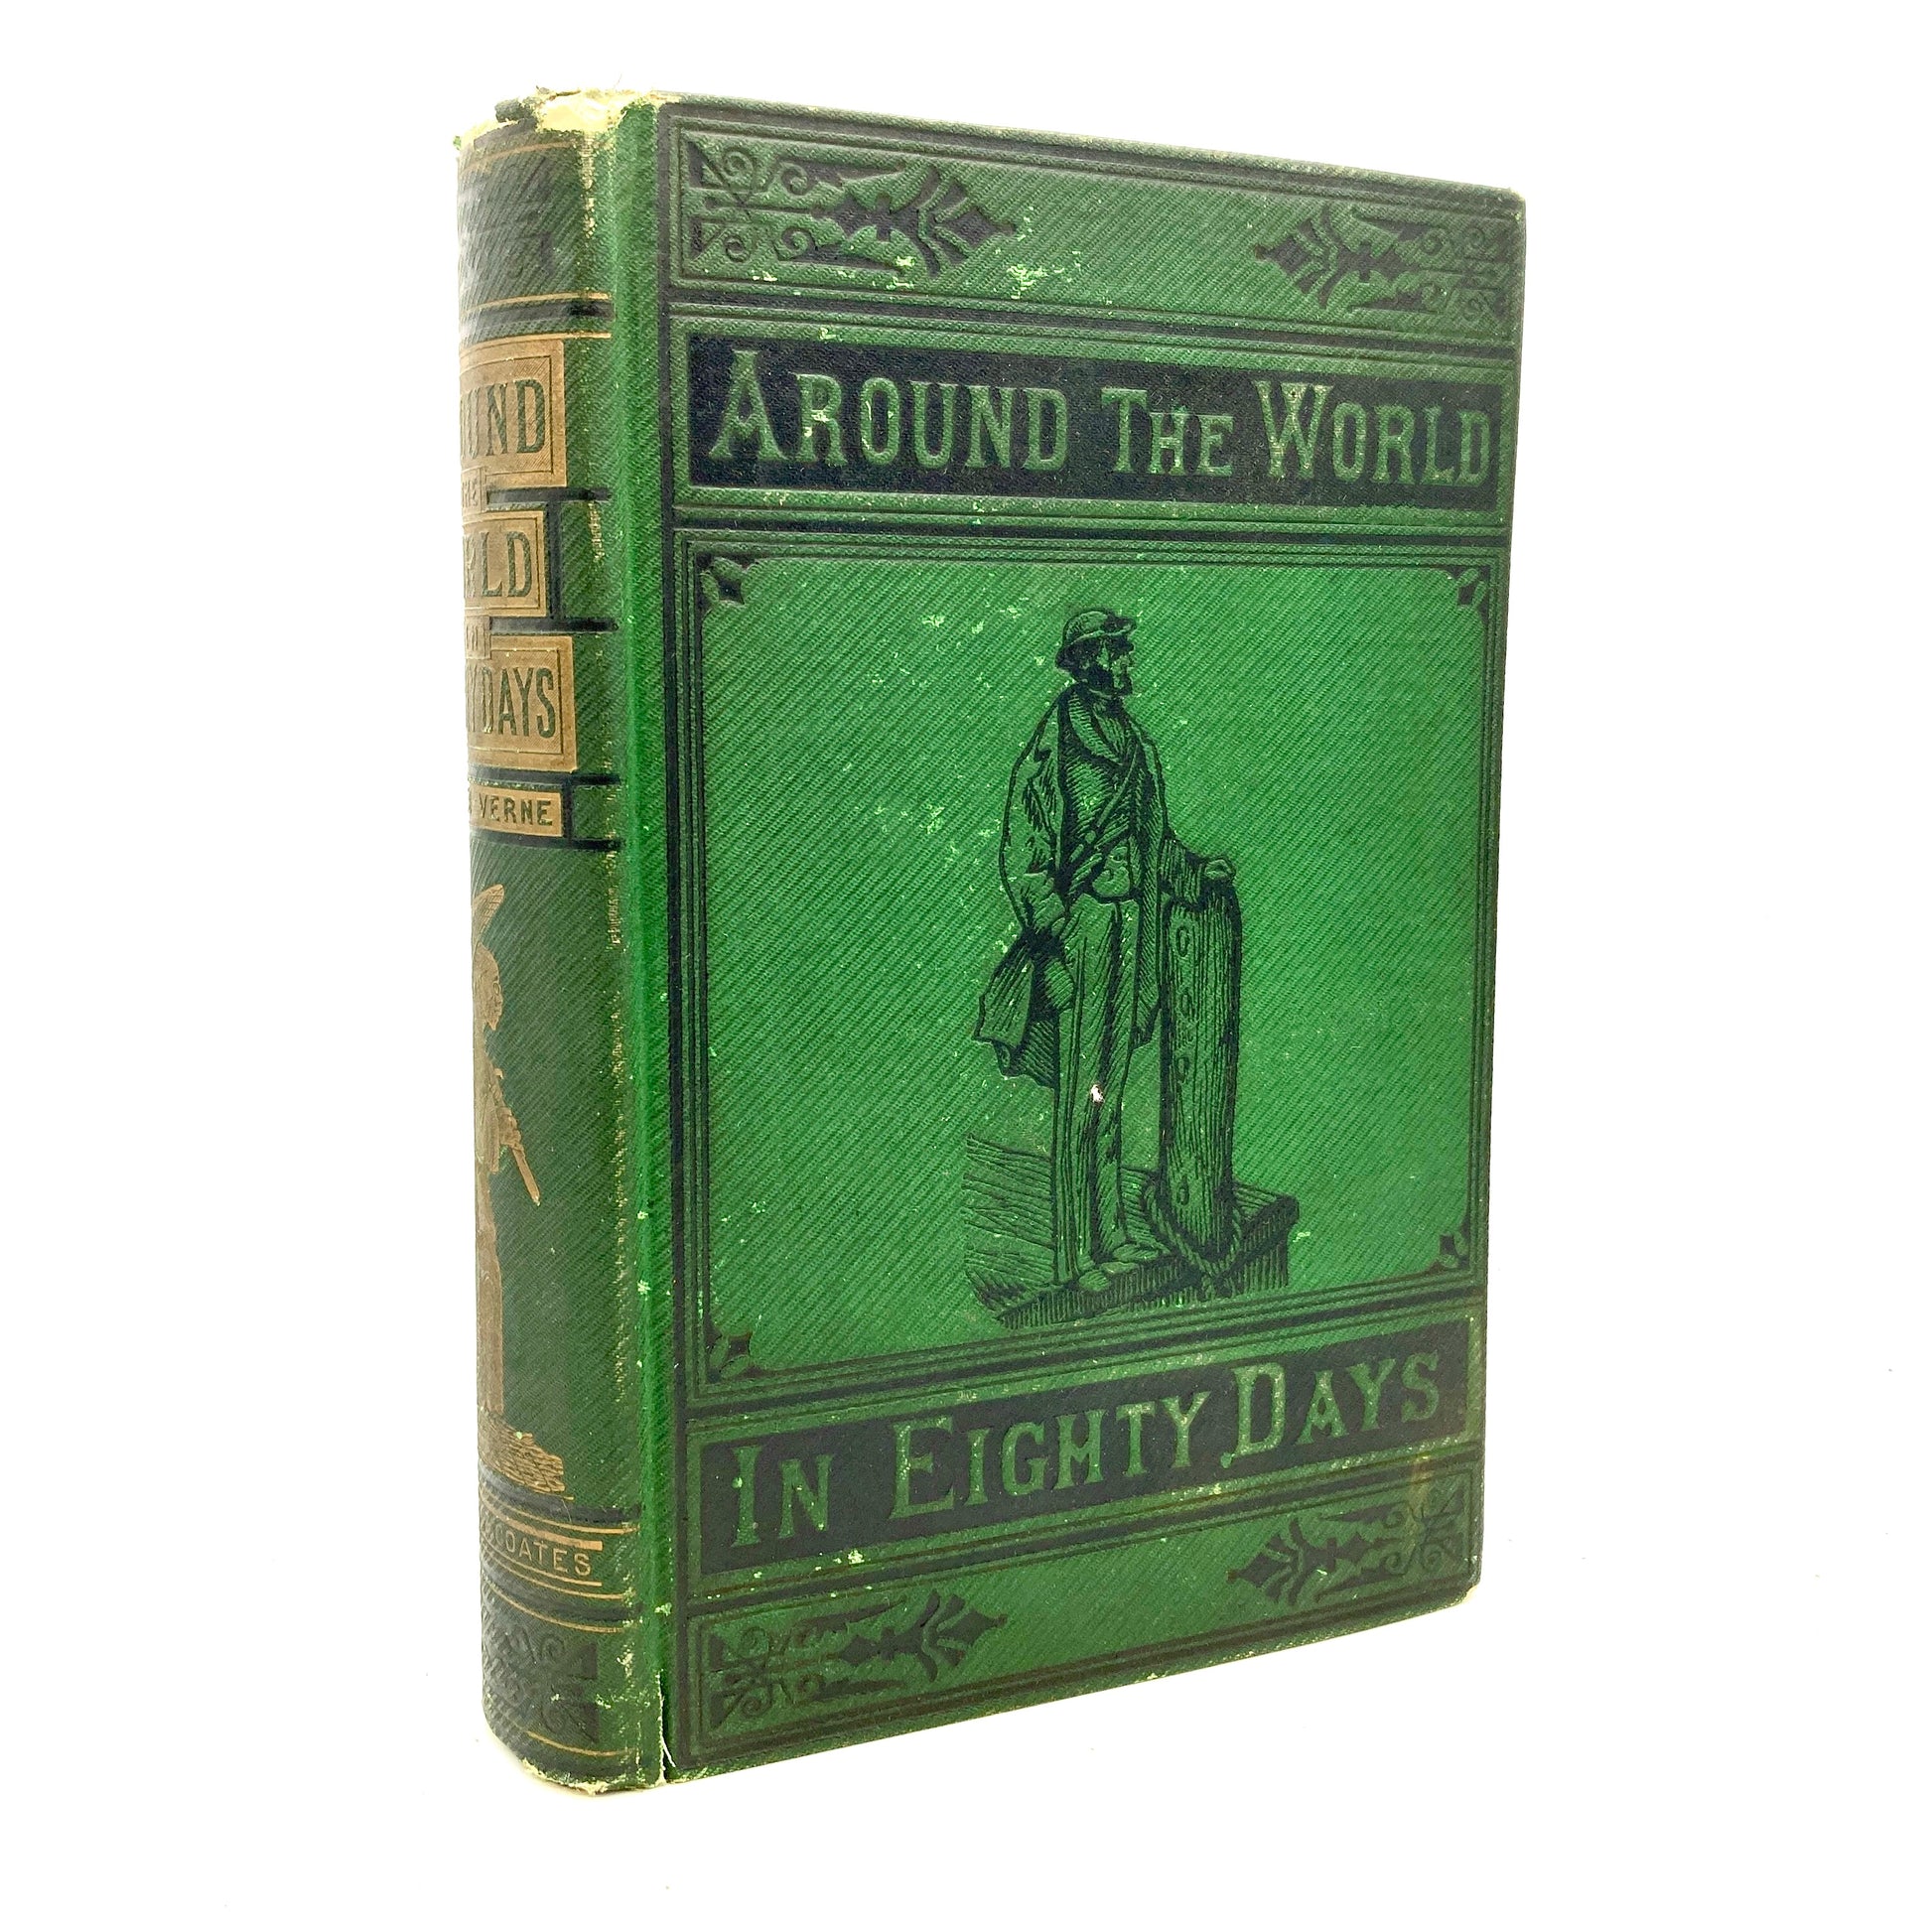 VERNE, Jules "Around the World in Eighty Days" [Porter & Coates, c1873] - Buzz Bookstore